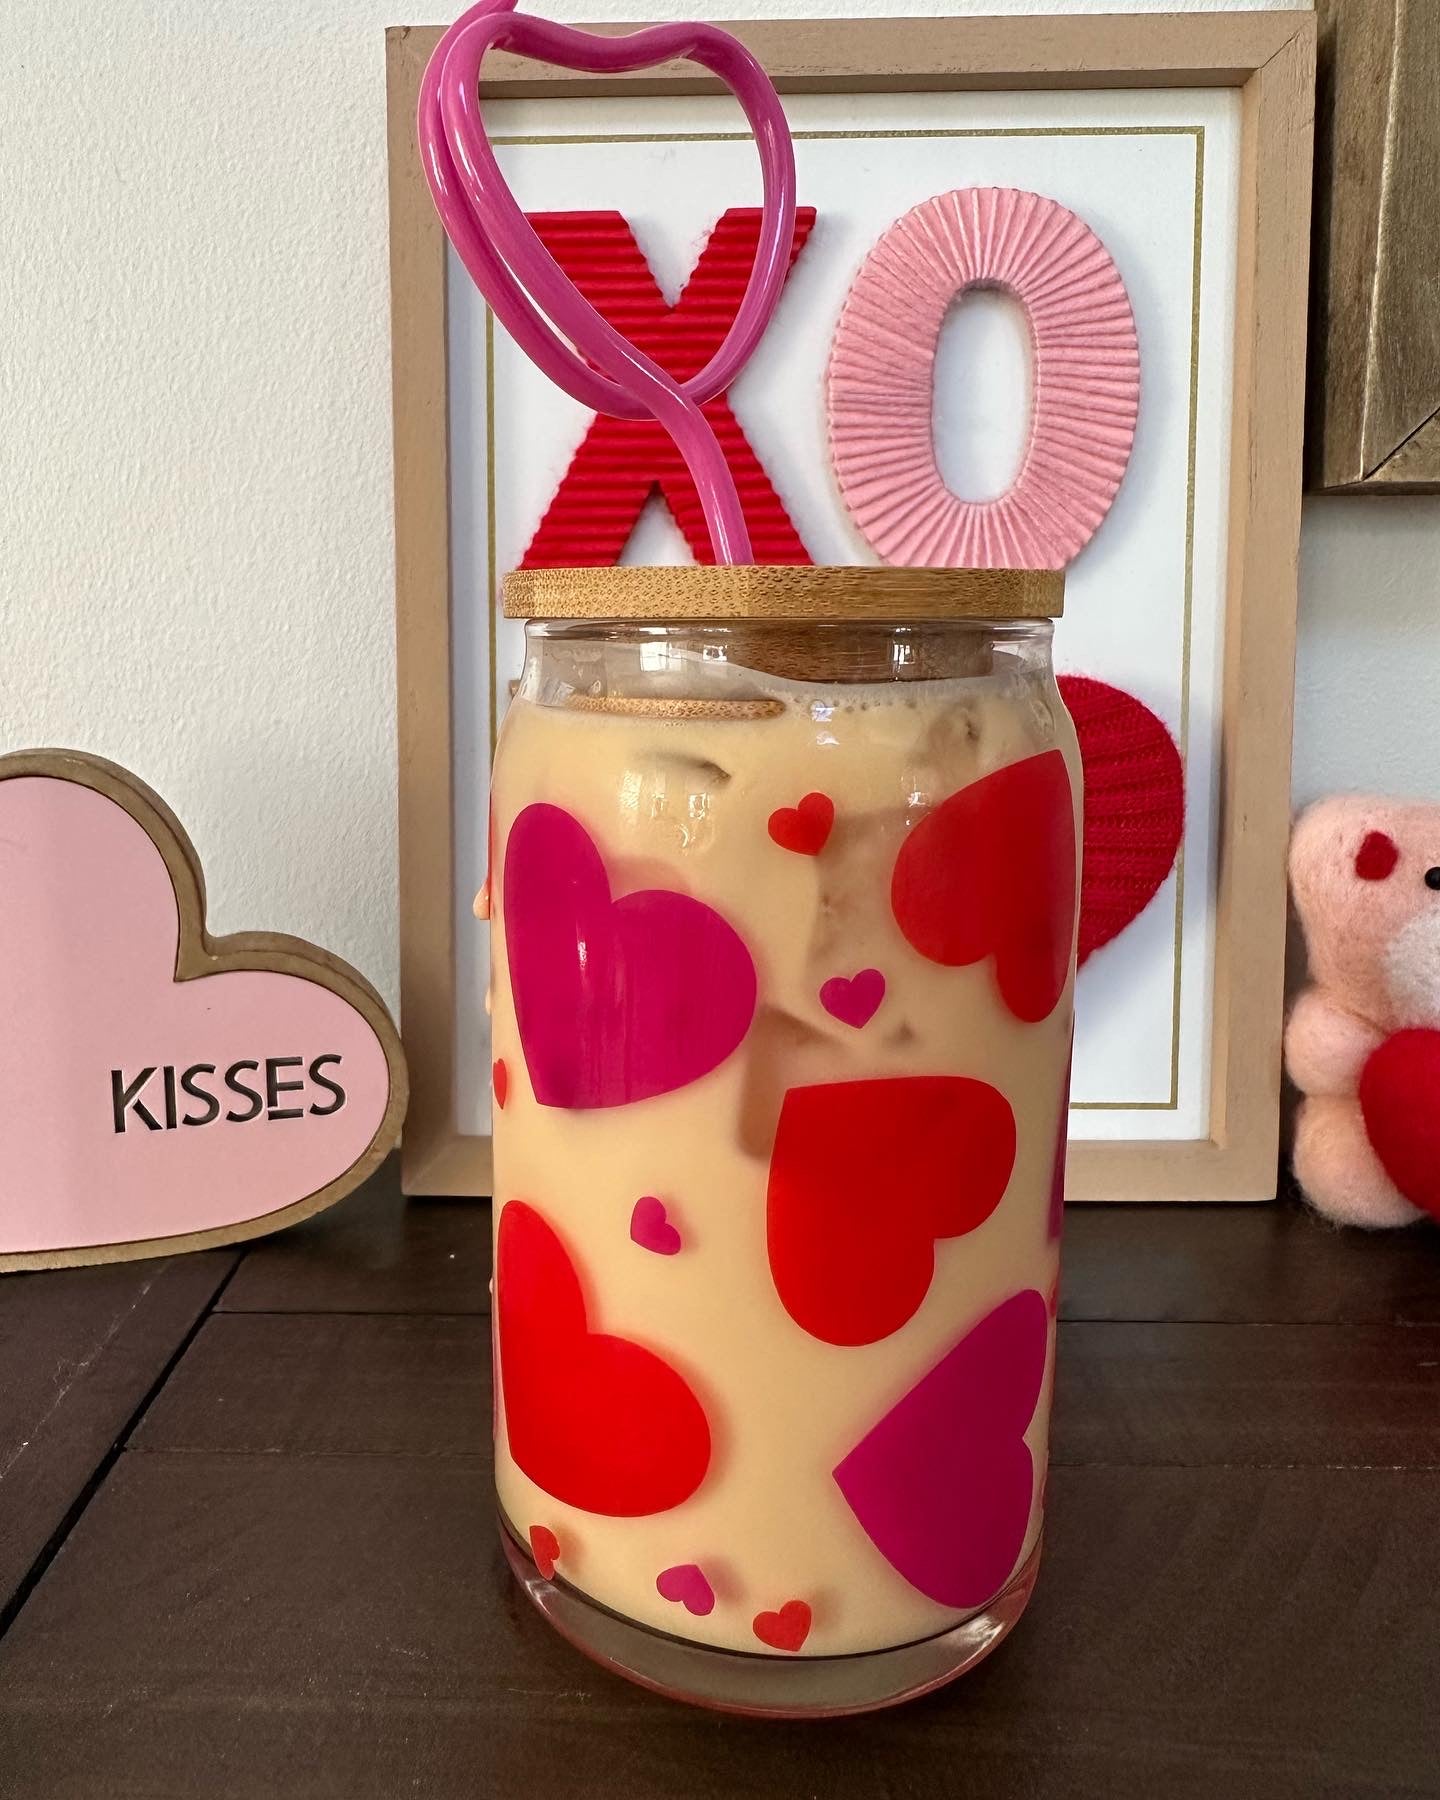 16oz Simple, Cute, Heart Tumbler Hearts 16oz Clear Tumbler Great Gift for  Cute Cup Lovers Valentine's Day Gift Idea 